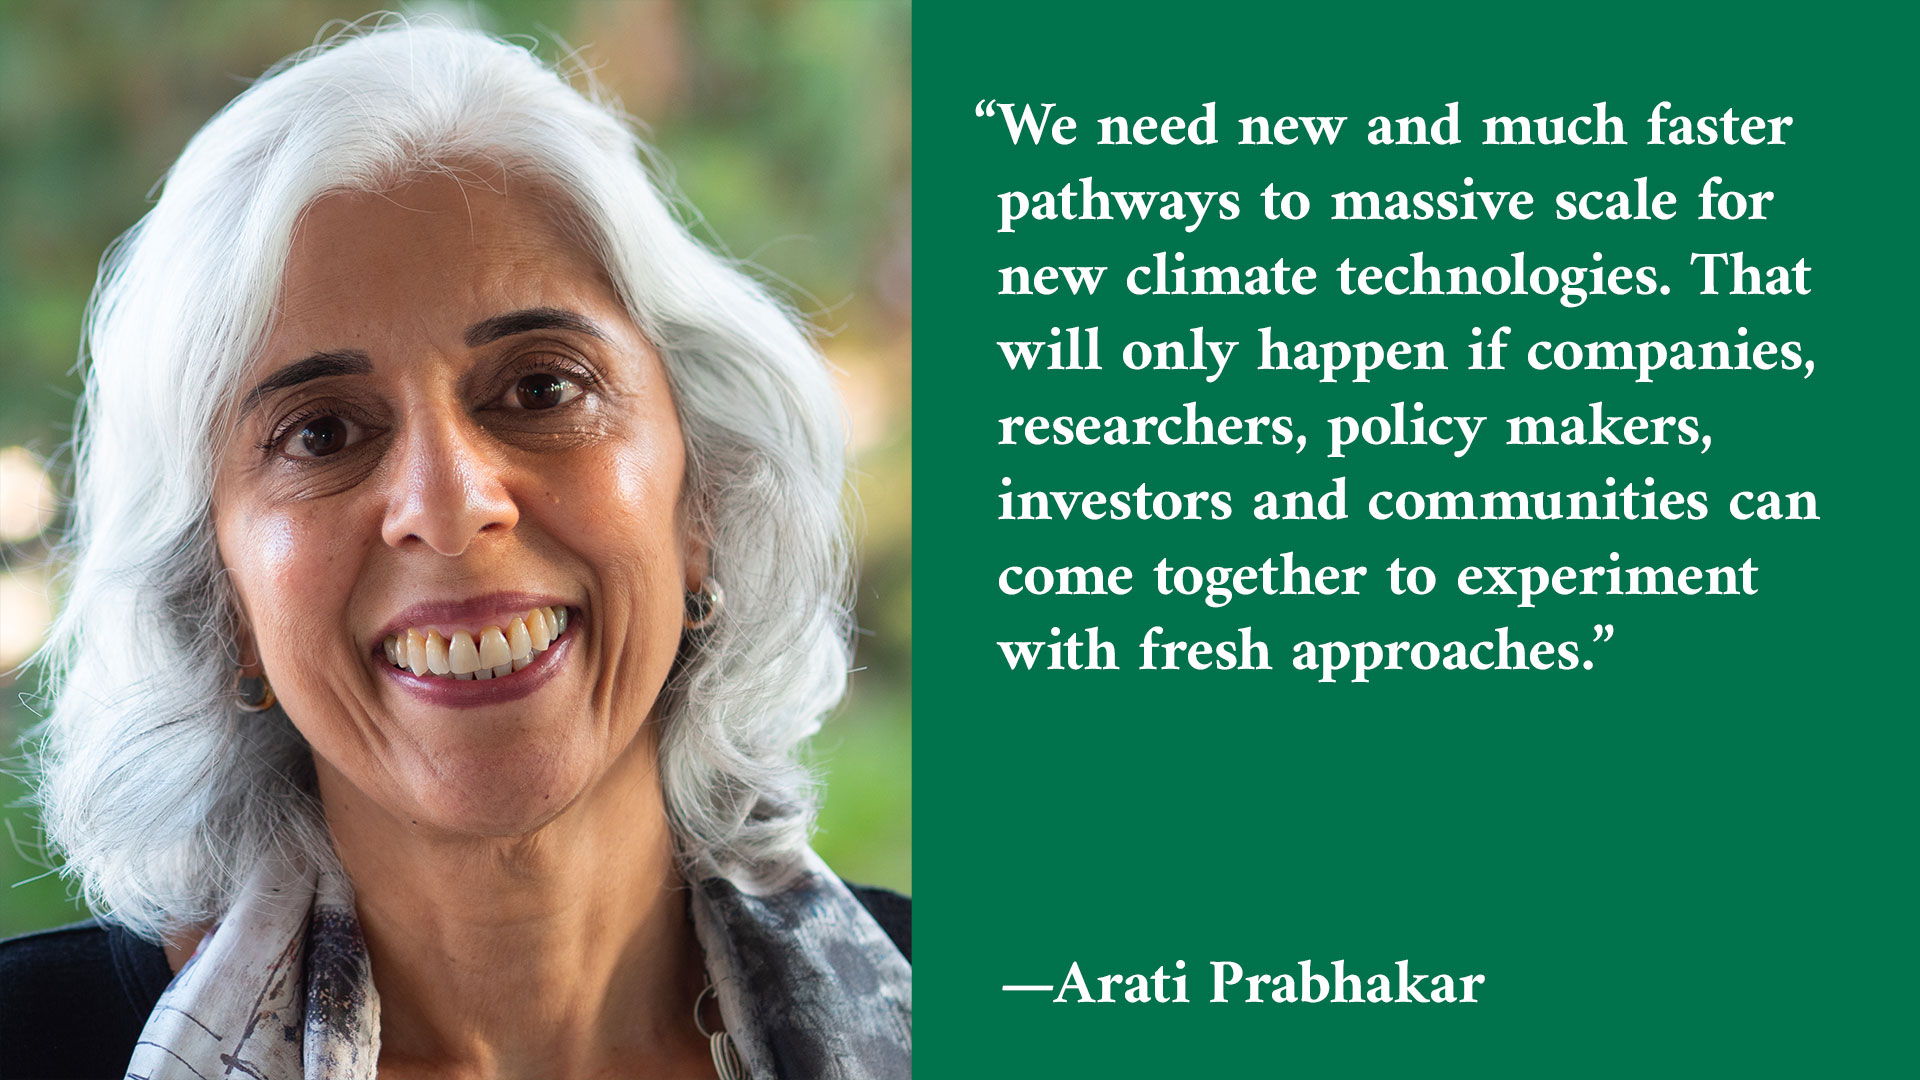 A photo of a smiling woman next to a quote that reads: “We need new and much faster pathways to massive scale for new climate technologies. That will only happen if companies, researchers, policy makers, investors, and communities can come together to experiment with fresh approaches.” — Arati Prabhakar